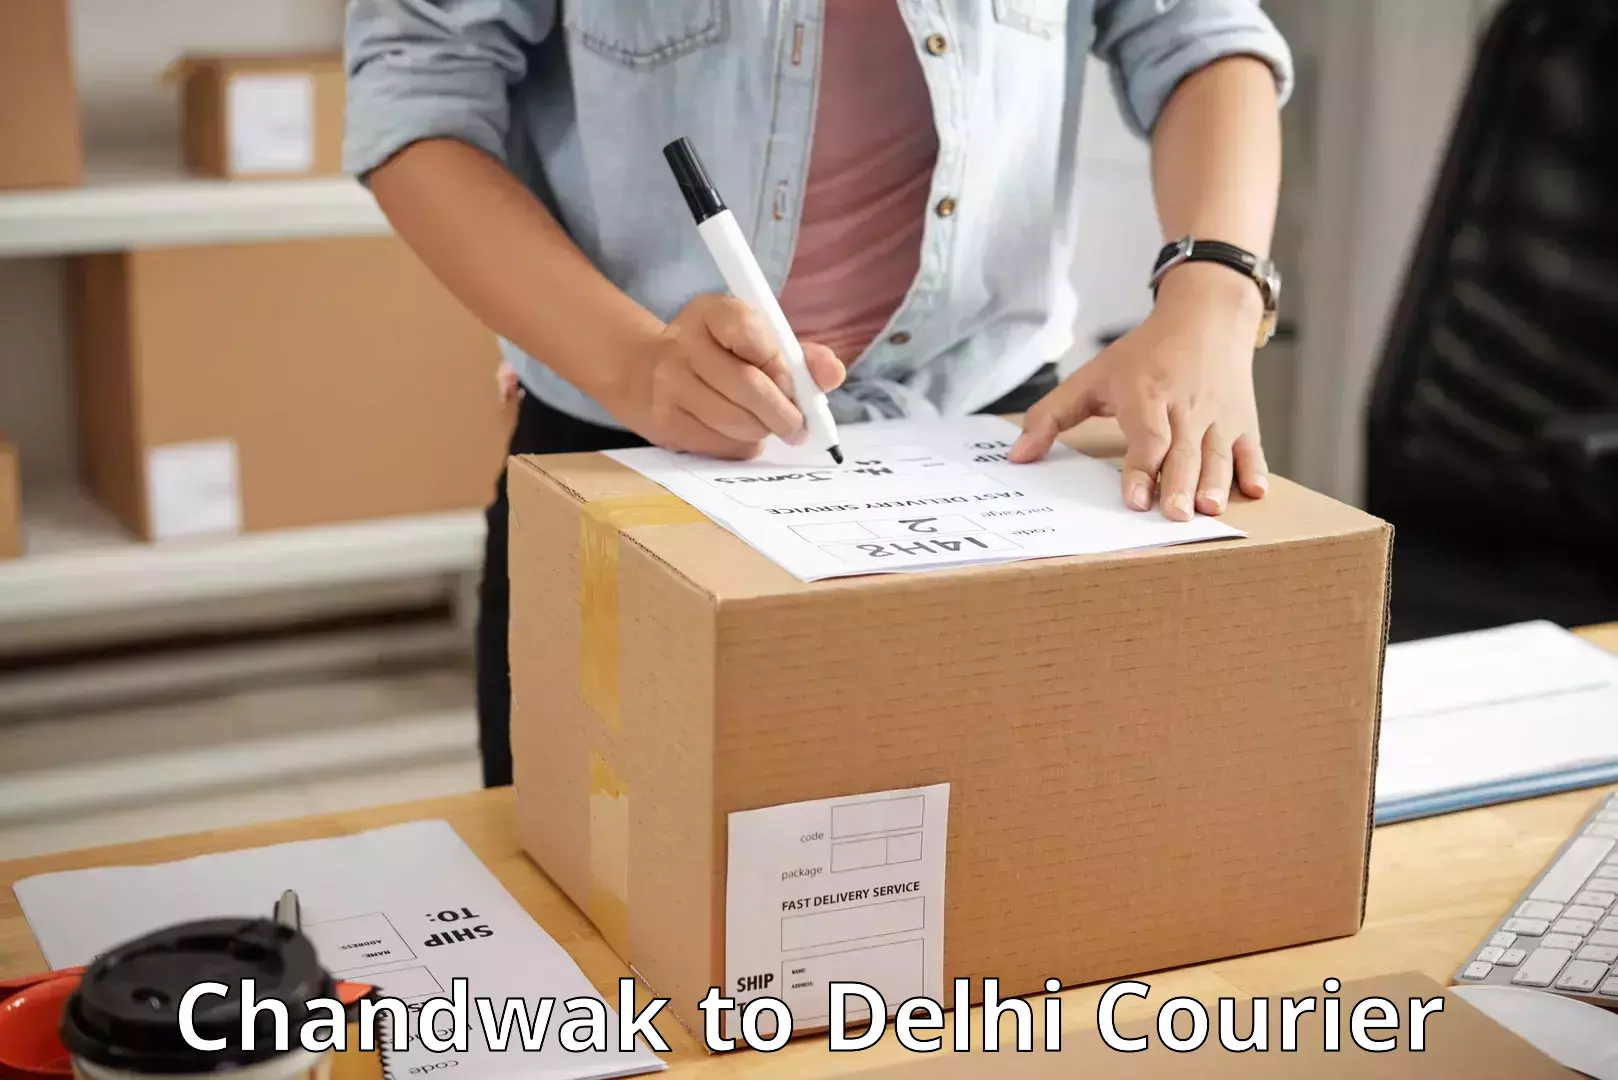 Courier service comparison in Chandwak to Lodhi Road